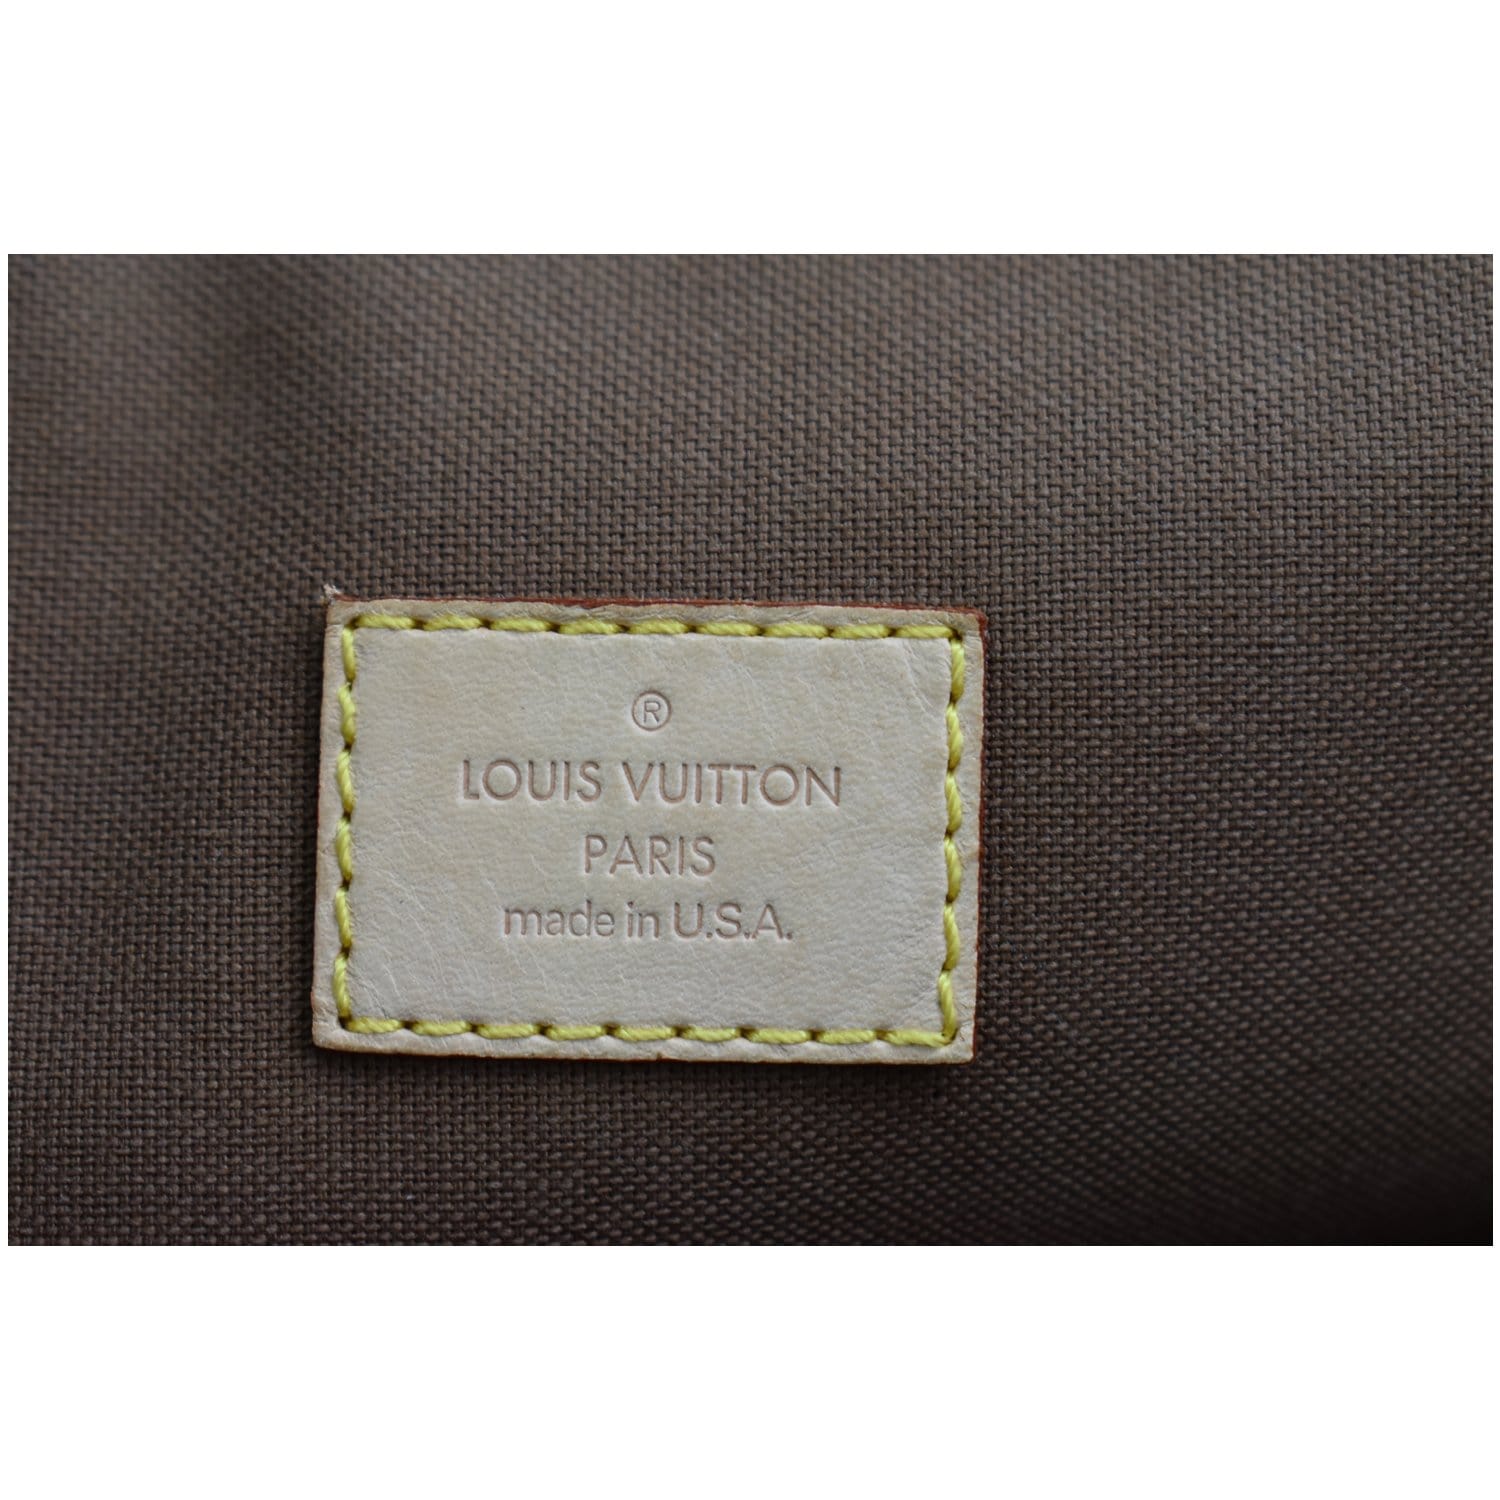 LOUIS VUITTON Soft Lockit PM in Rubis Taurillon Leather - More